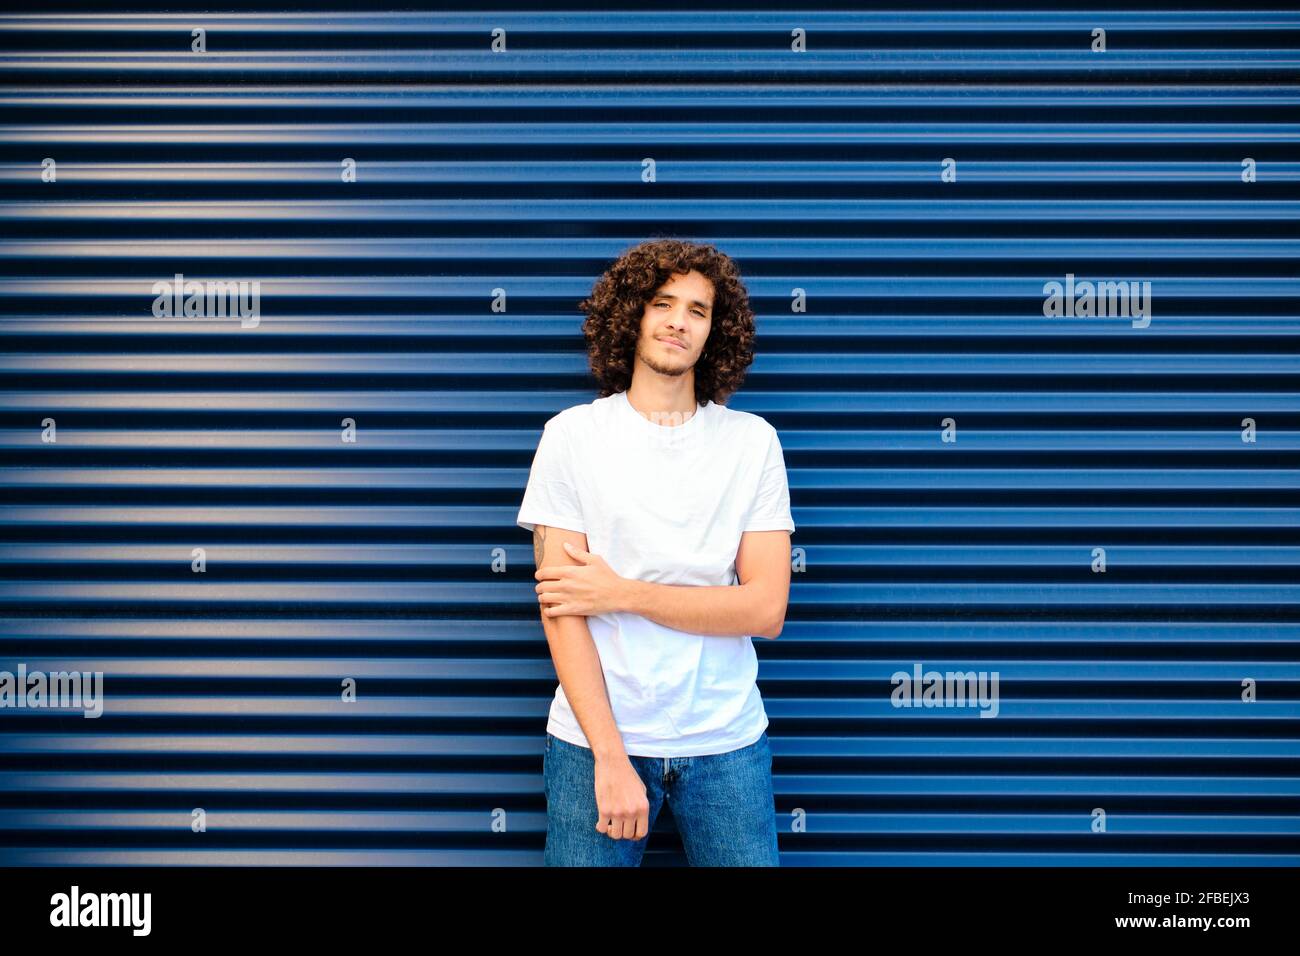 Caucasian young man standing in front of blue shutter Stock Photo